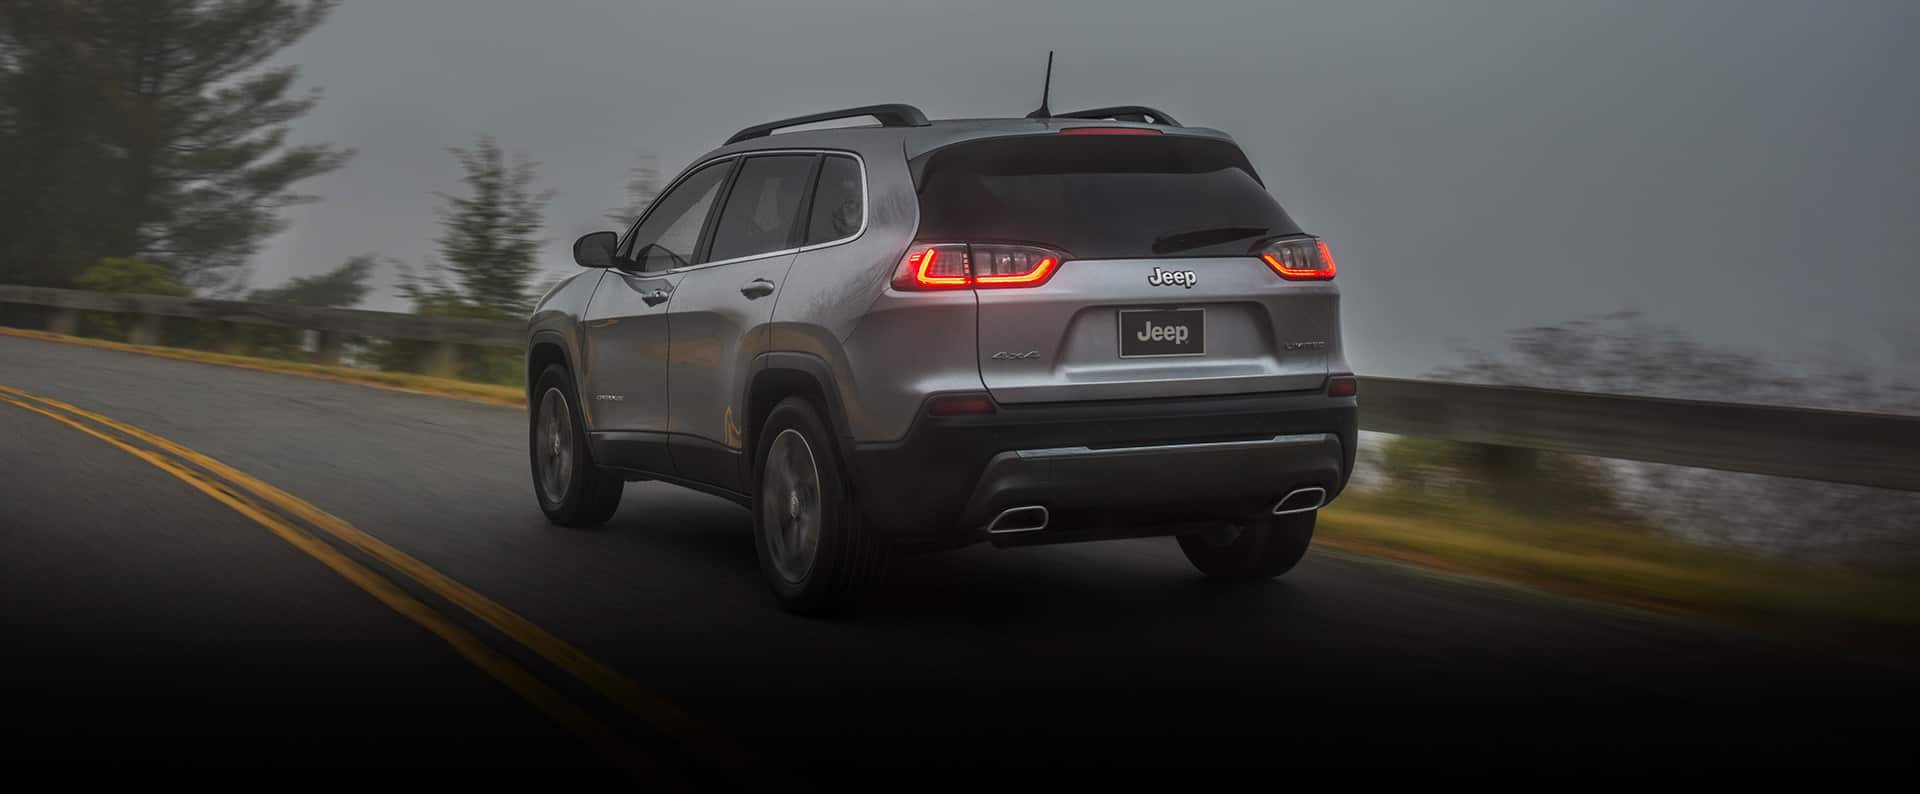 The 2022 Jeep Cherokee Limited being driven on a wet road under an overcast sky.